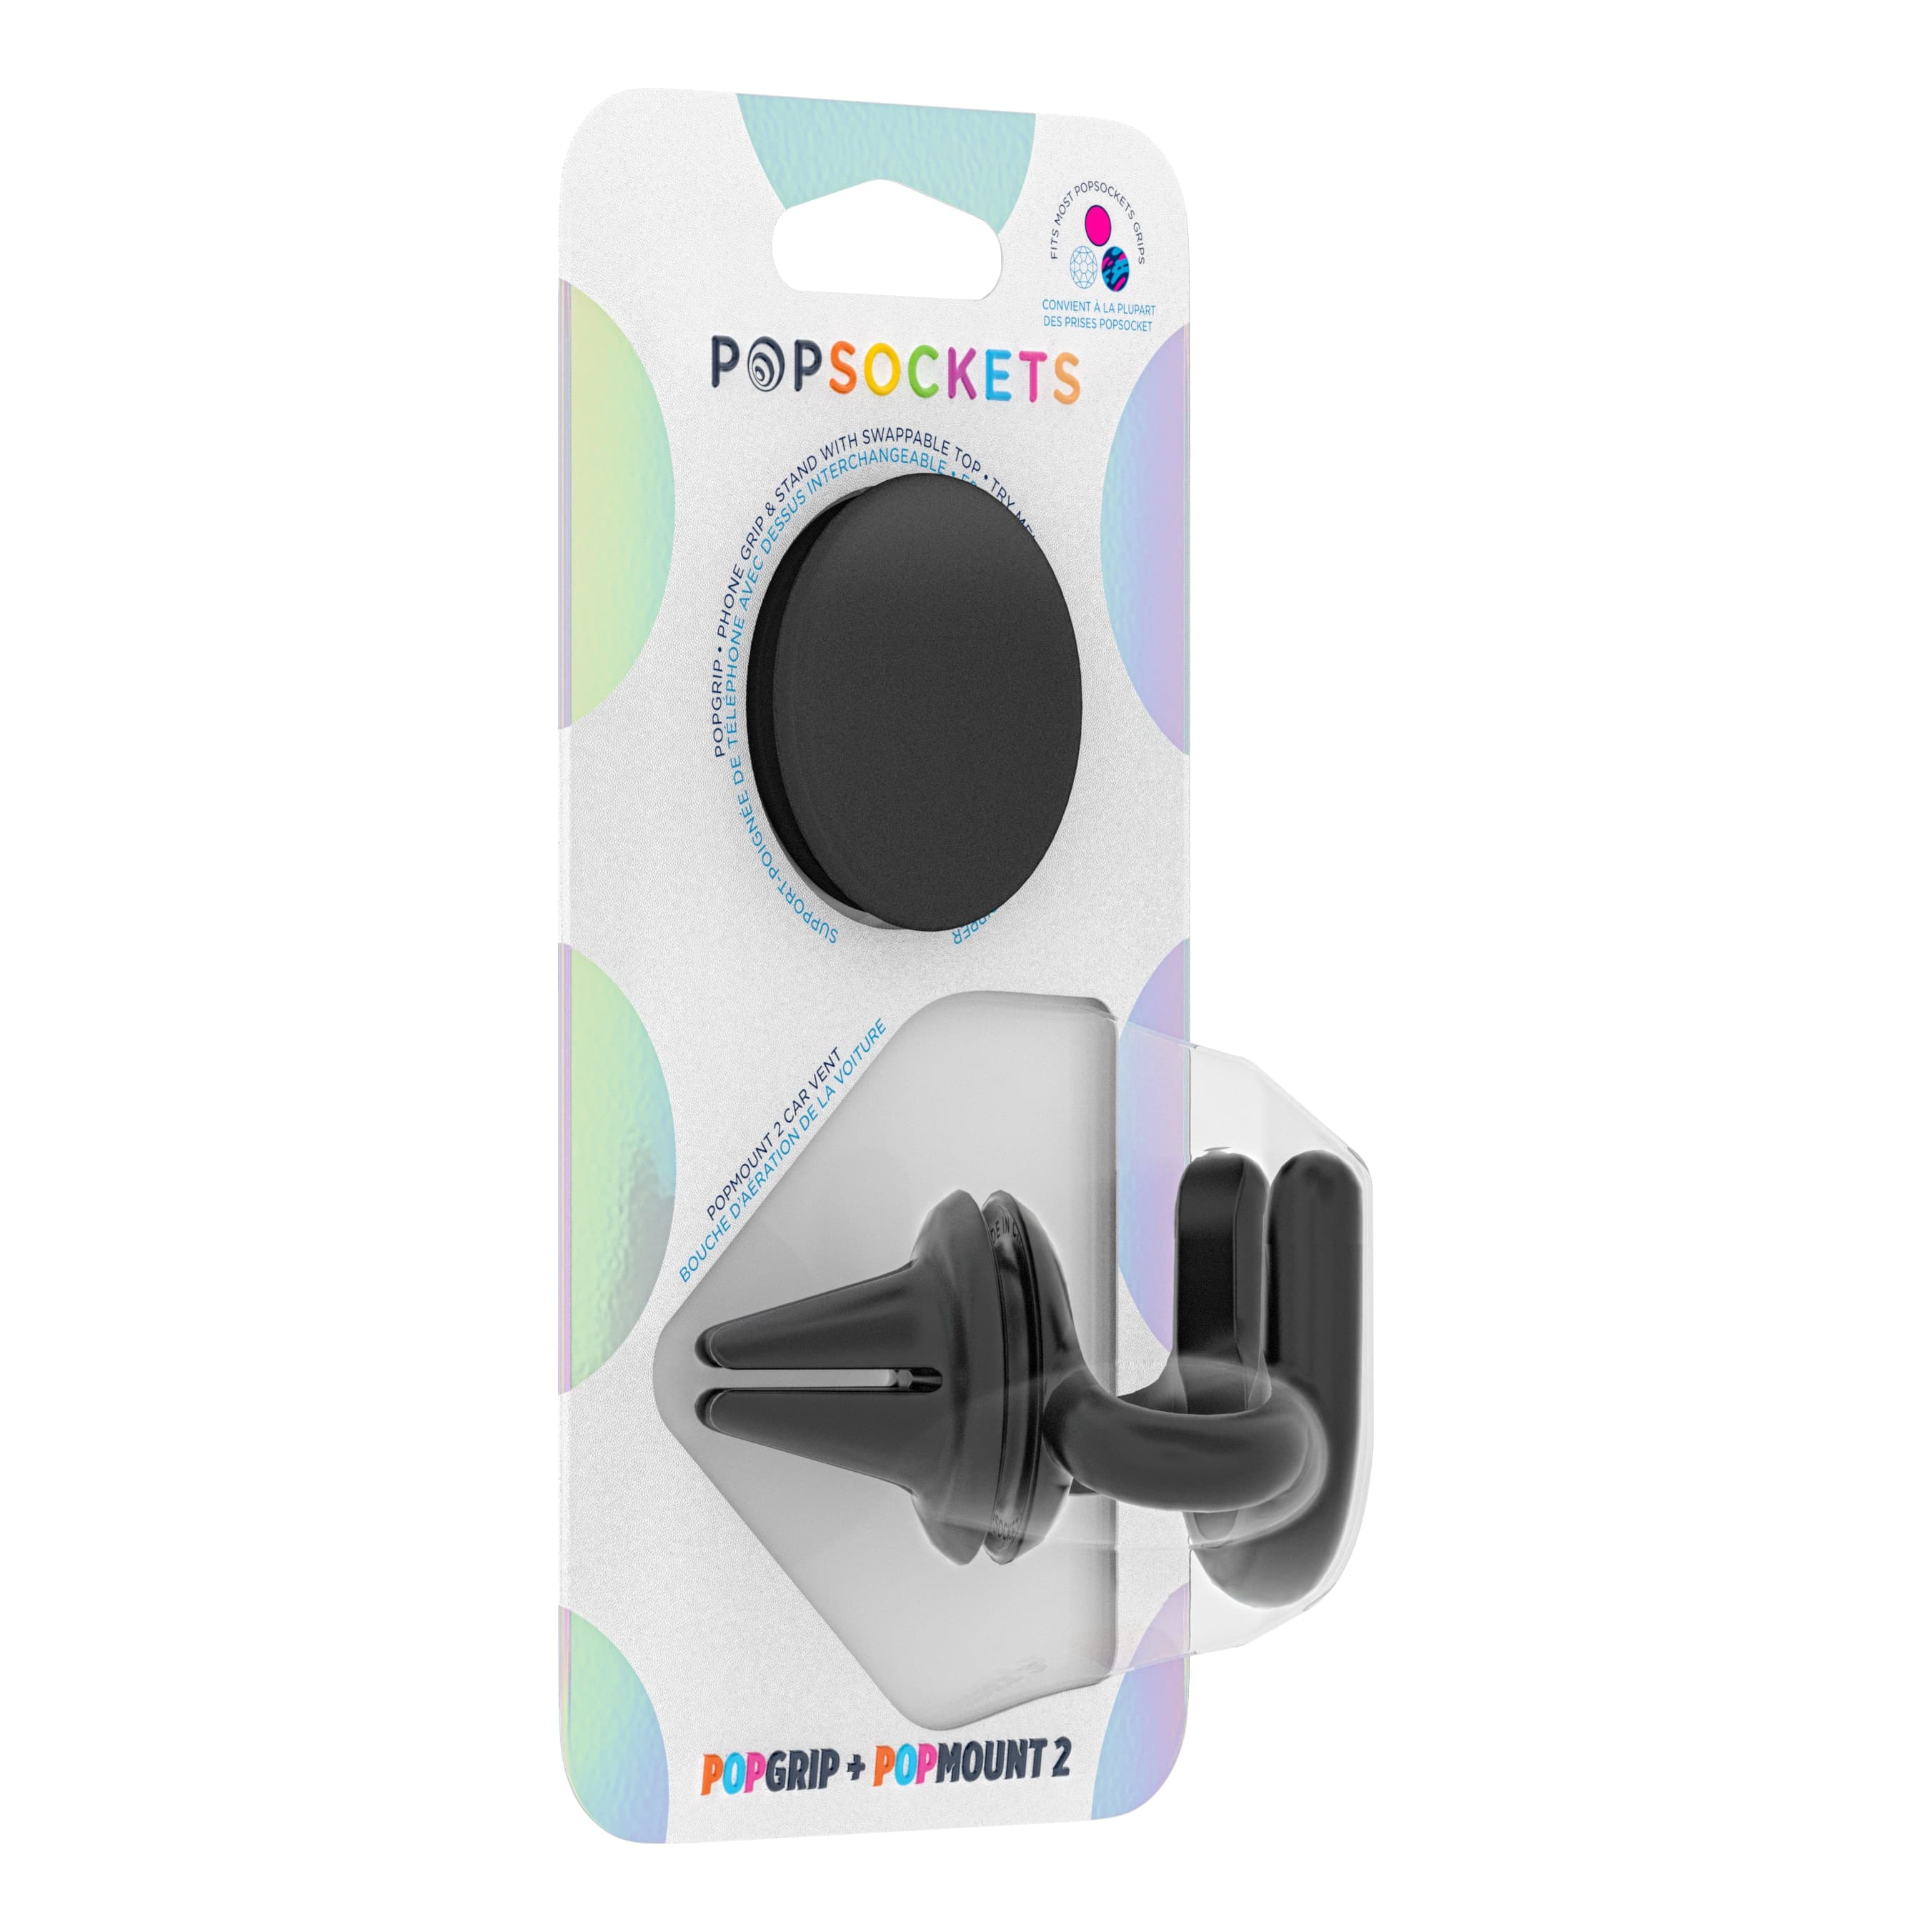 PopSockets® Combo Mount and PopGrip